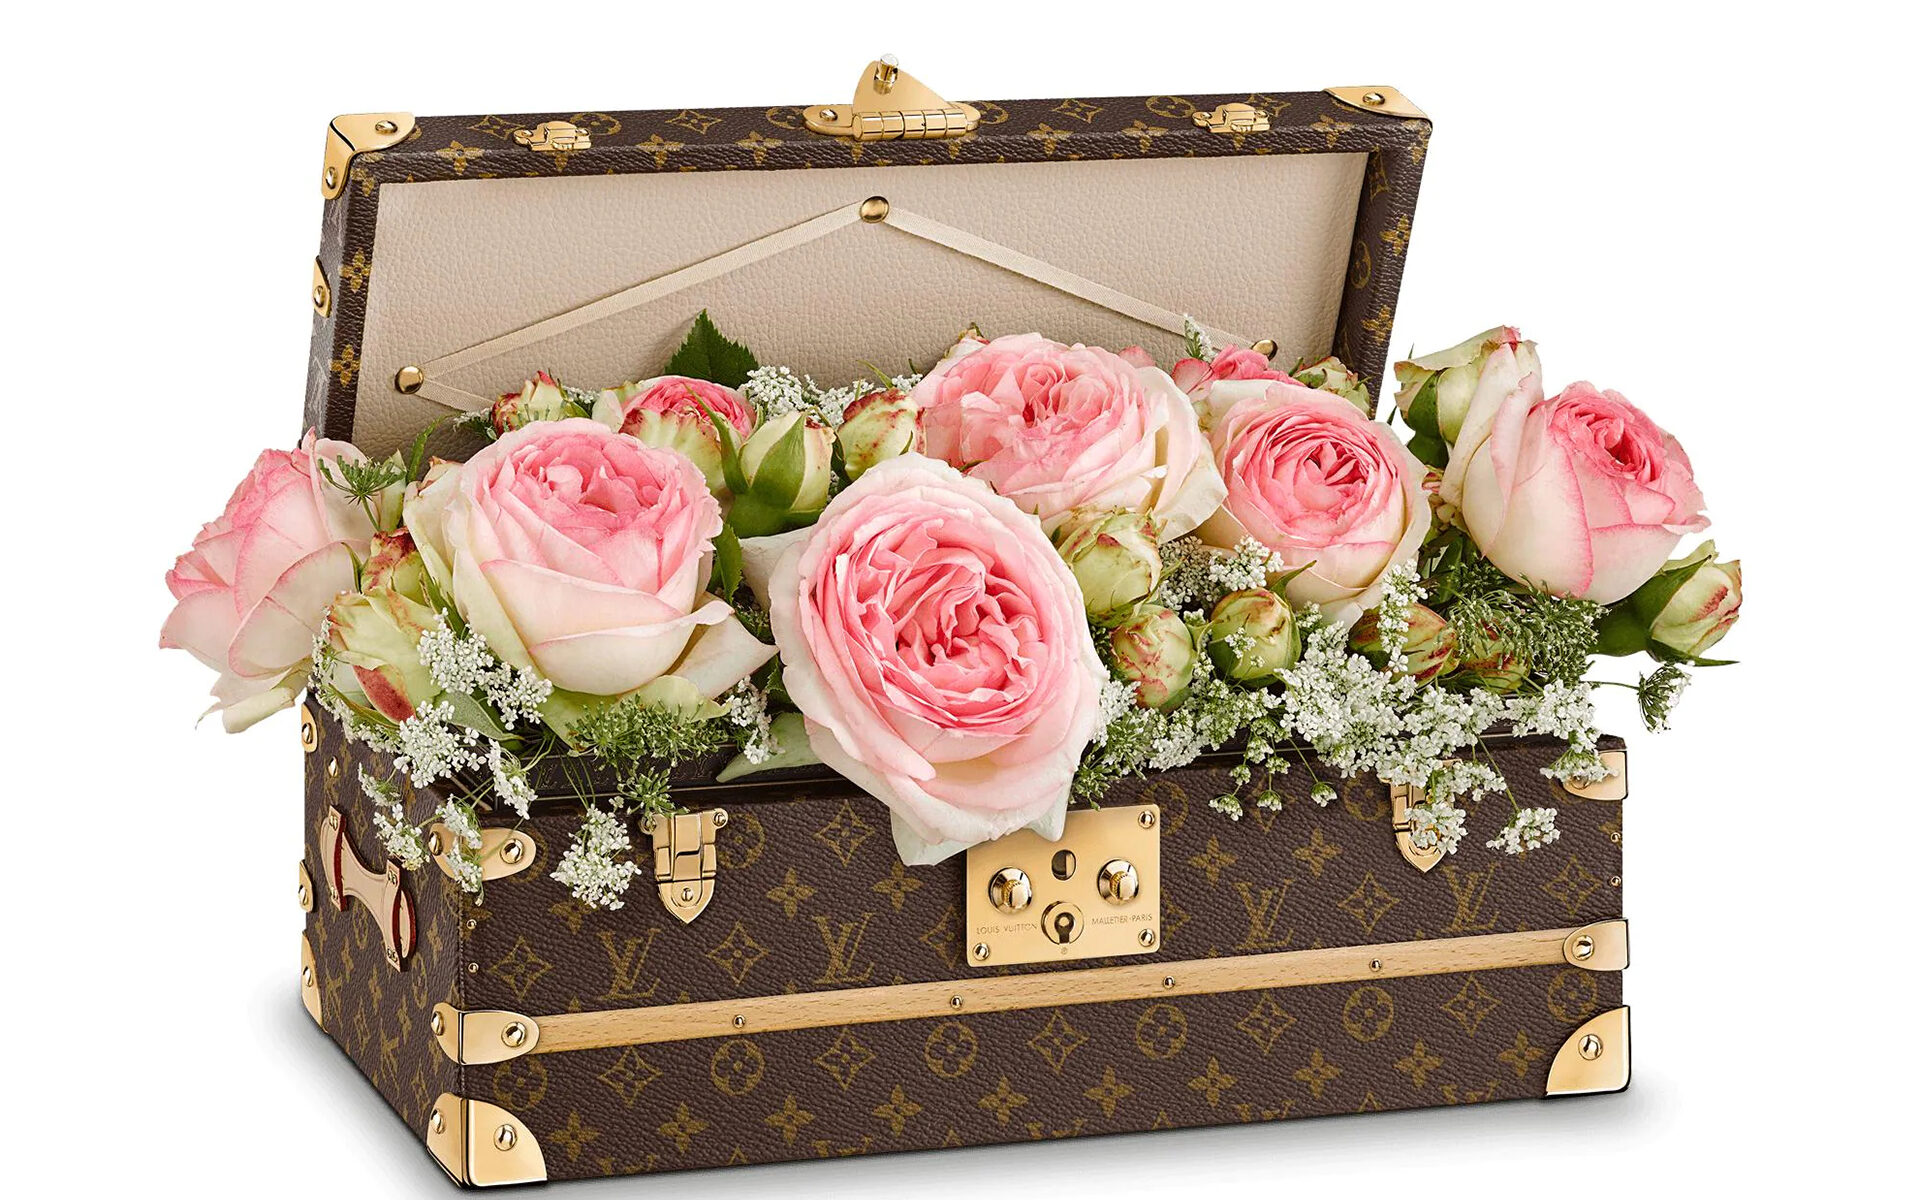 Extraordinary Personalized Gifts for Anyone  LOUIS VUITTON 